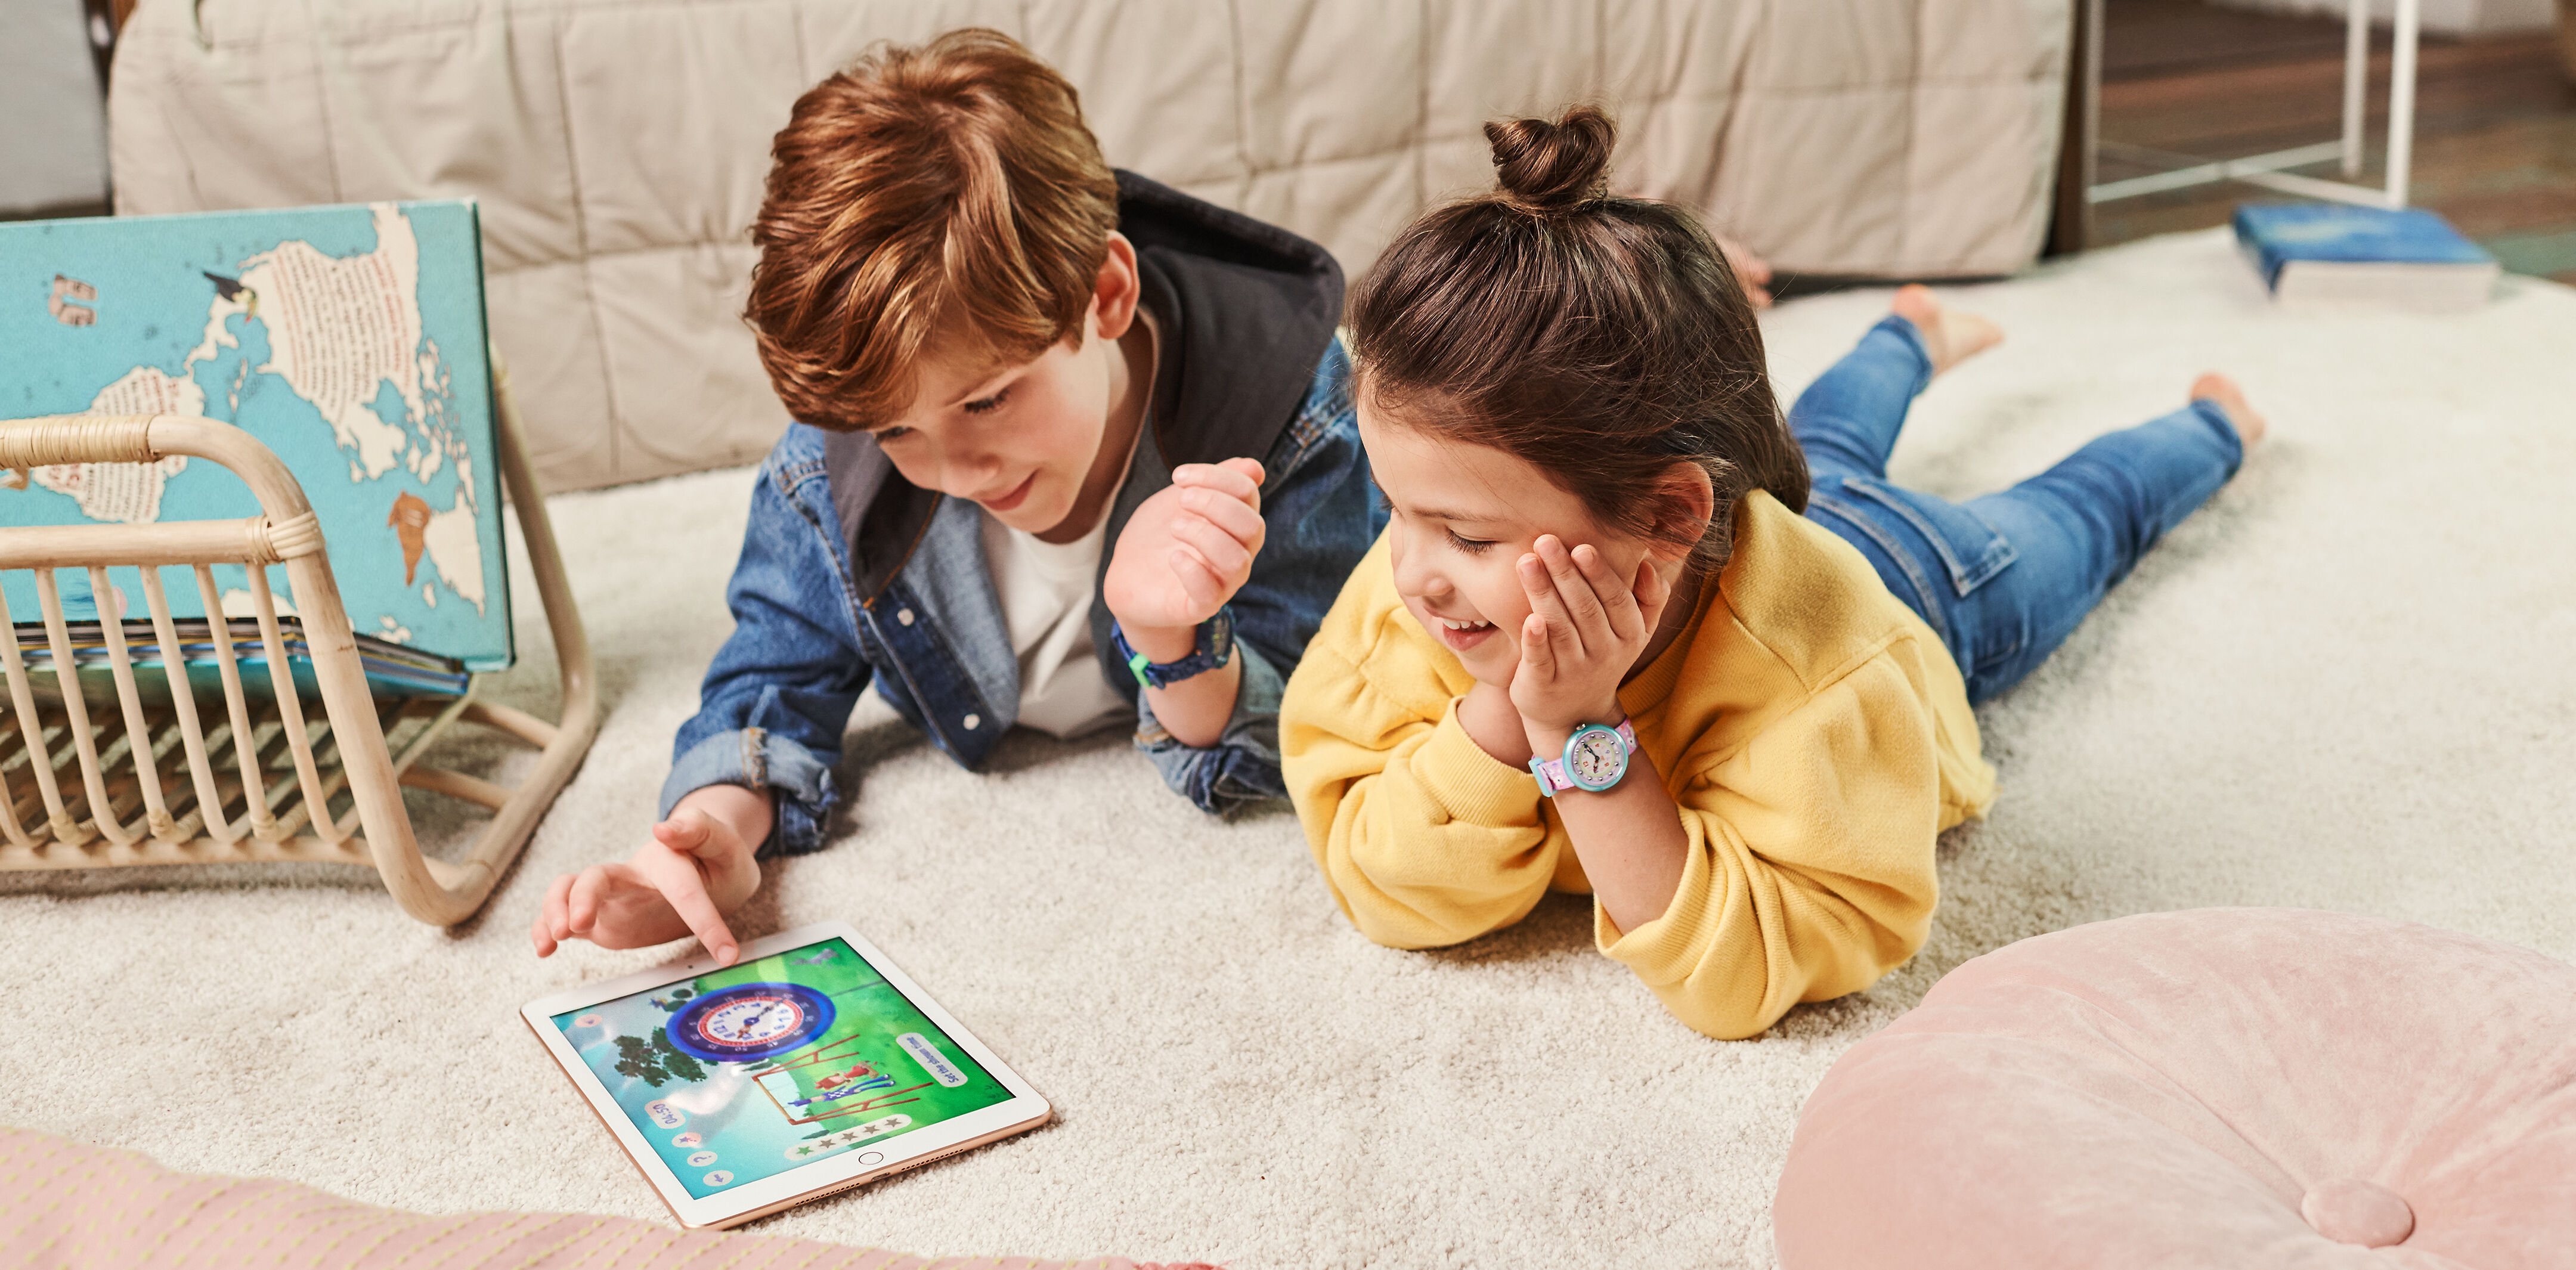 Kids playing educational games on their tablet